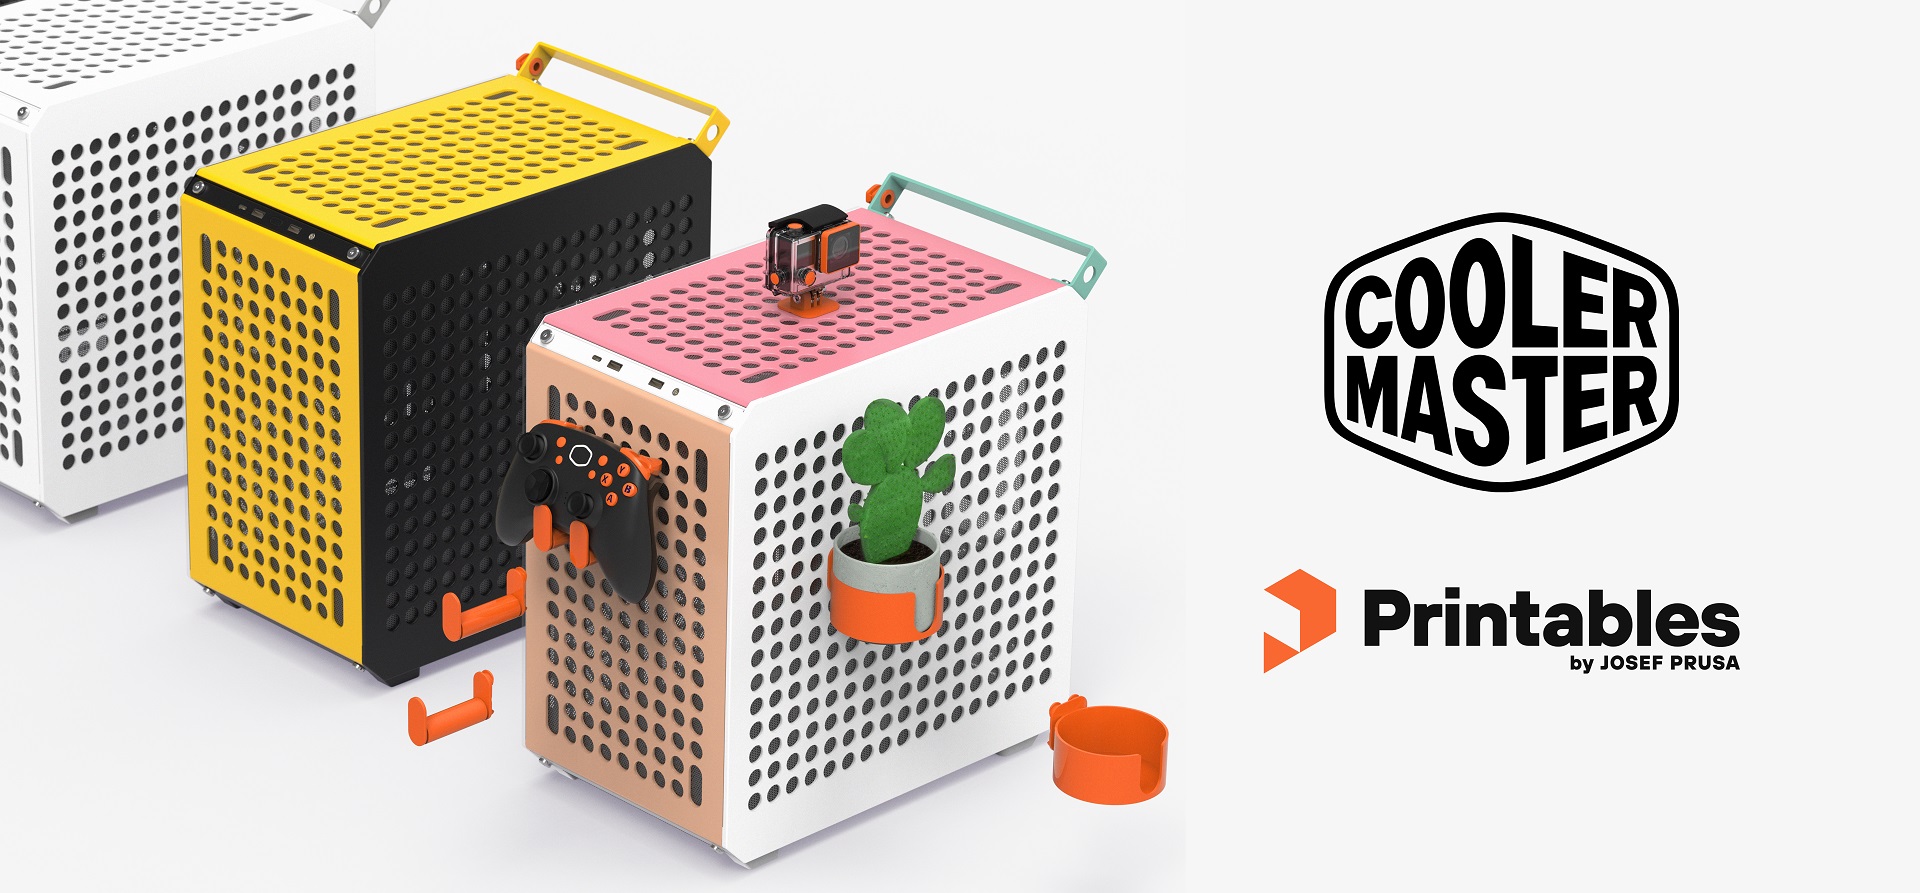 Attention all modders! – Cooler Master and Prusa are hosting the ultimate QUBE 500 3D printing design contest